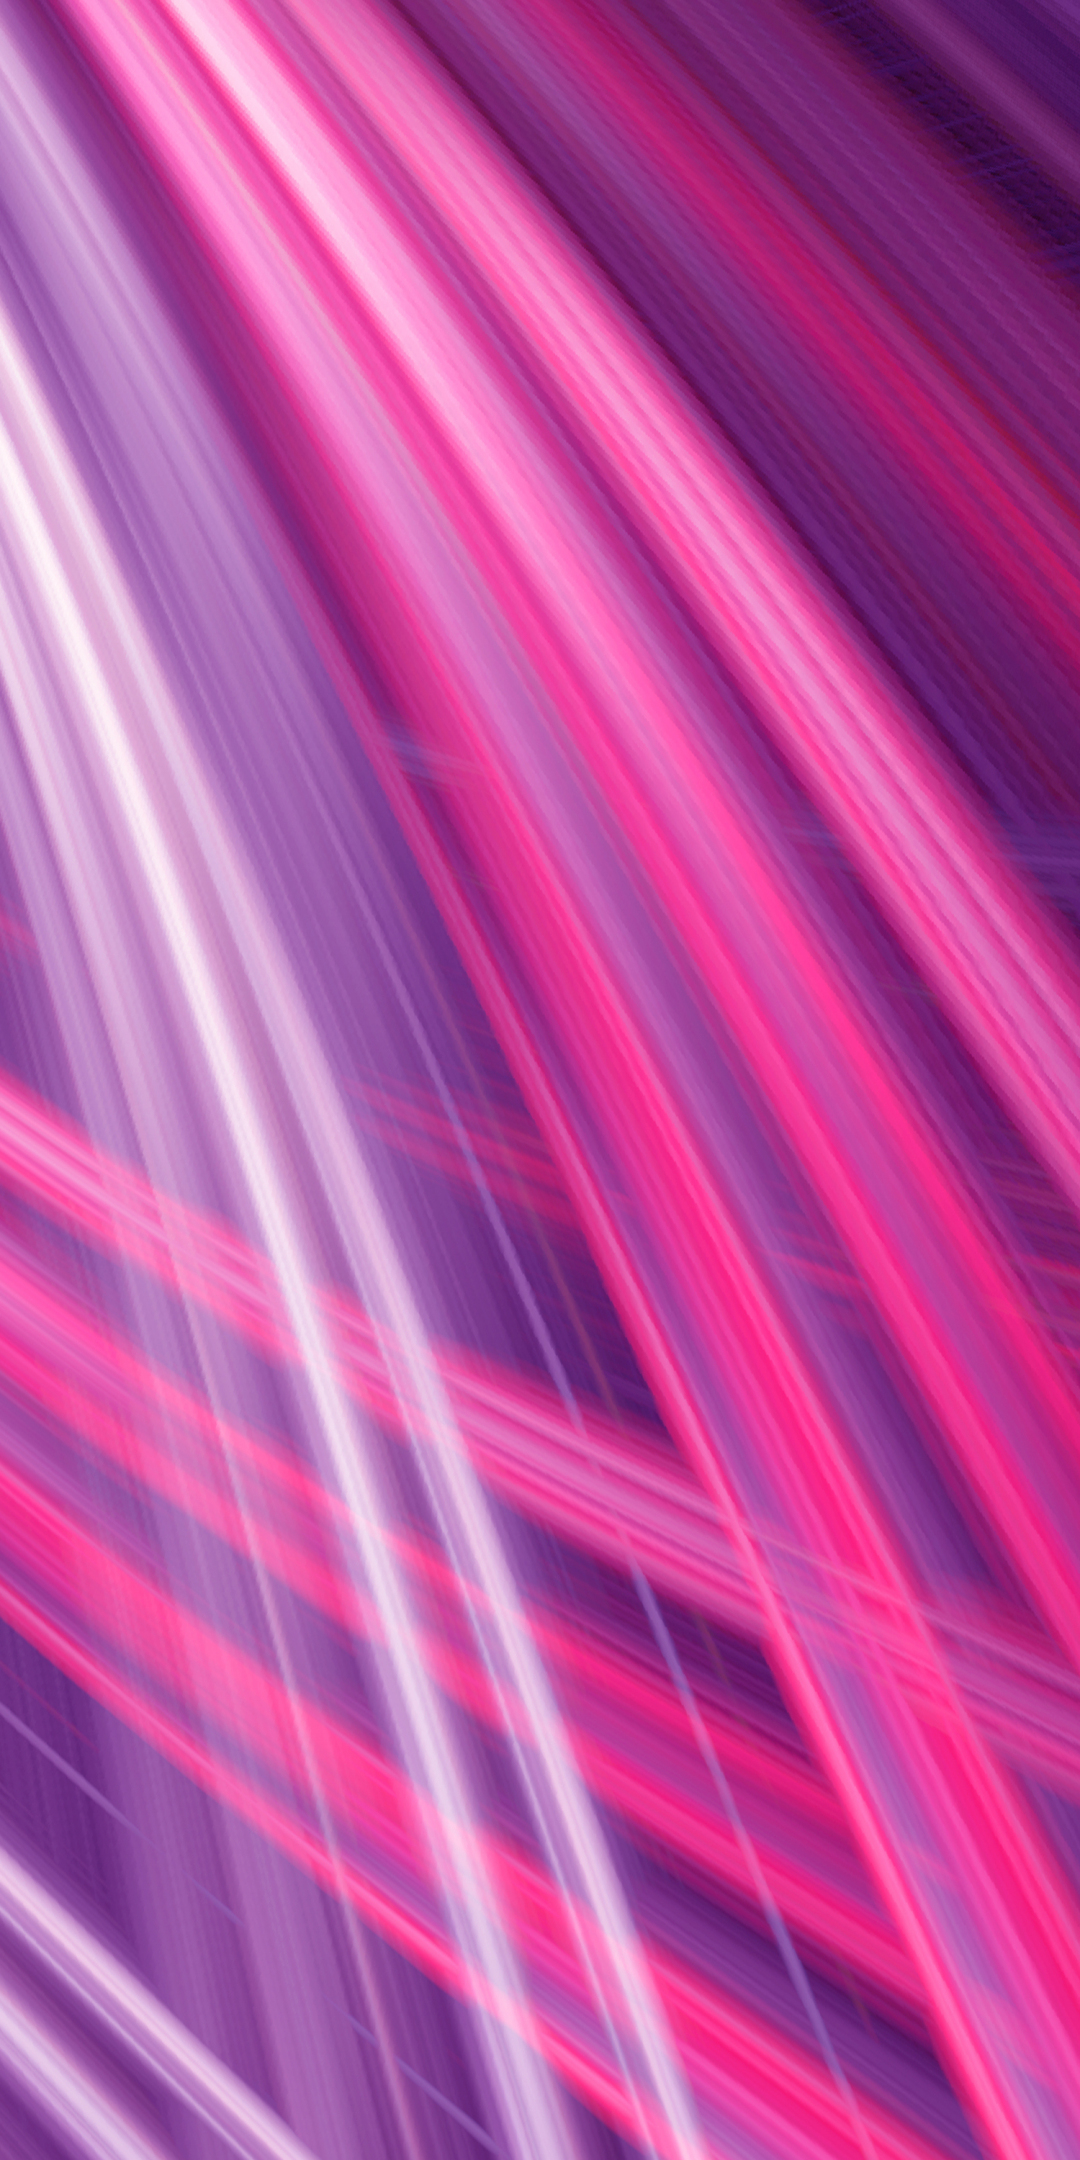 Lines, pink, intersection, light, 1080x2160 wallpaper